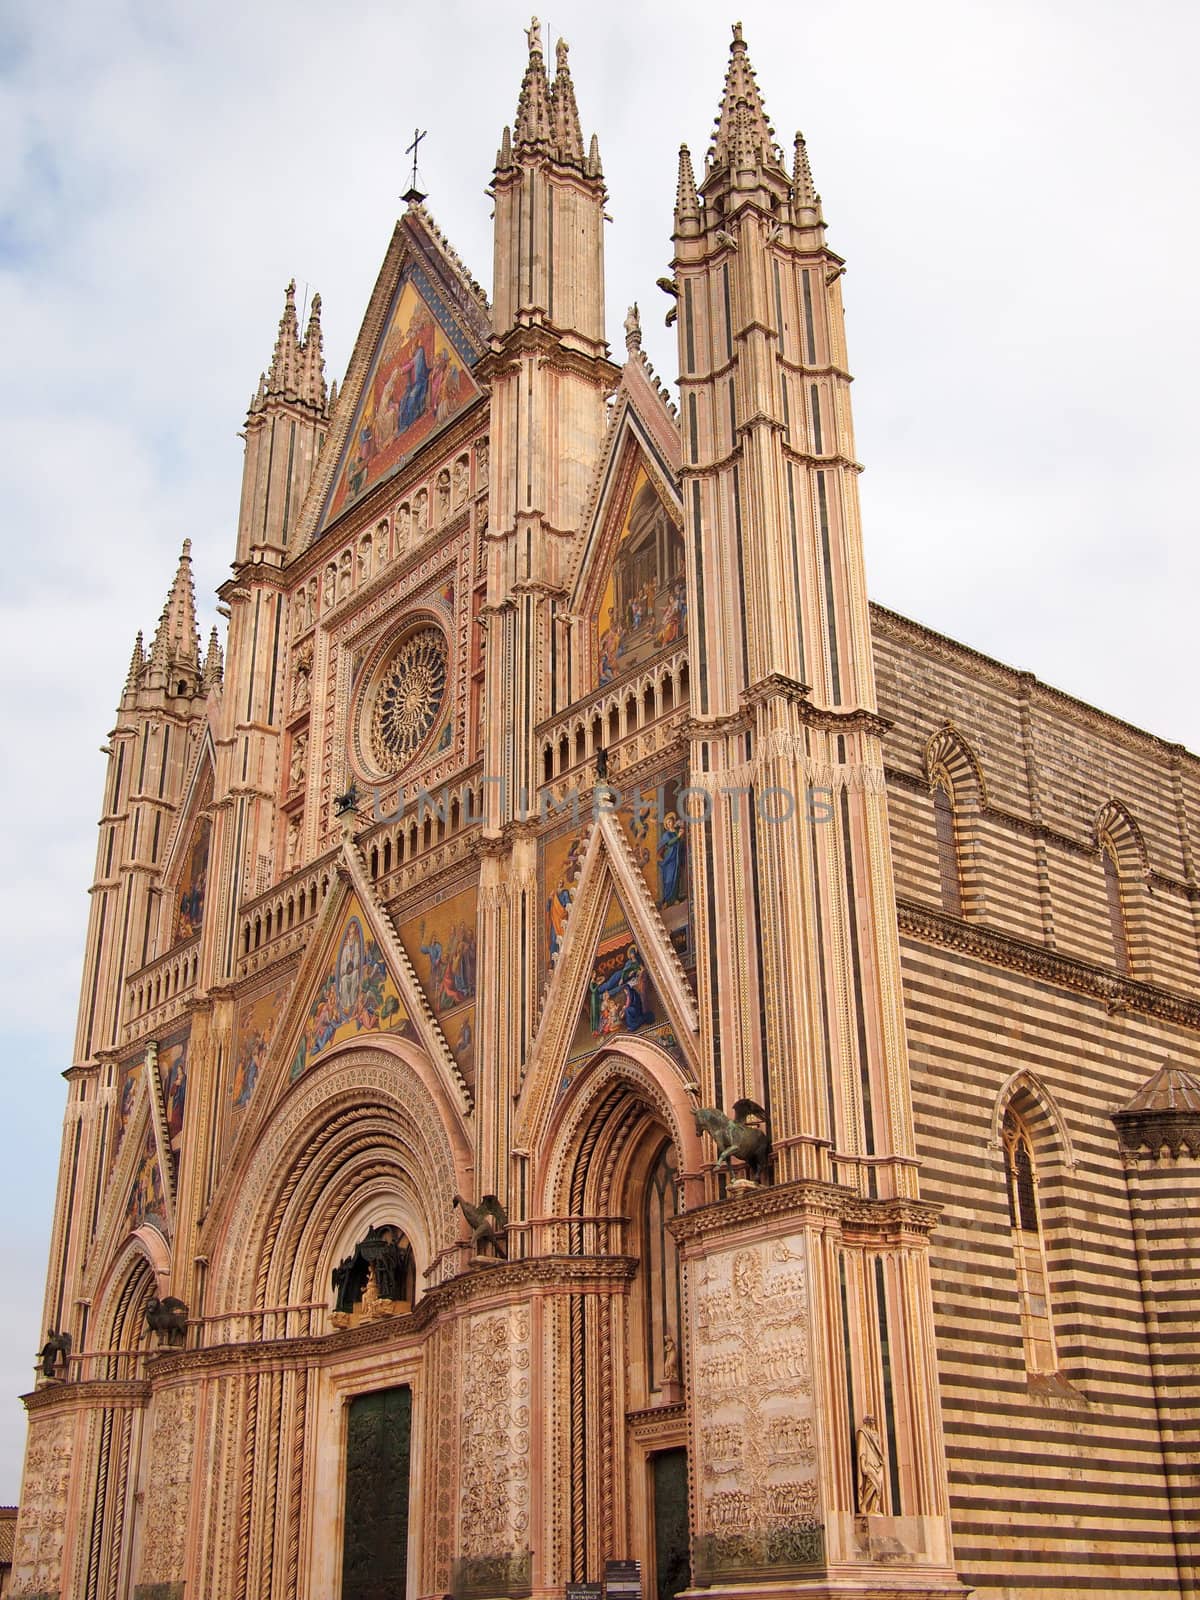 View of the front of the gothic cathedral of Ovieto, Italy.